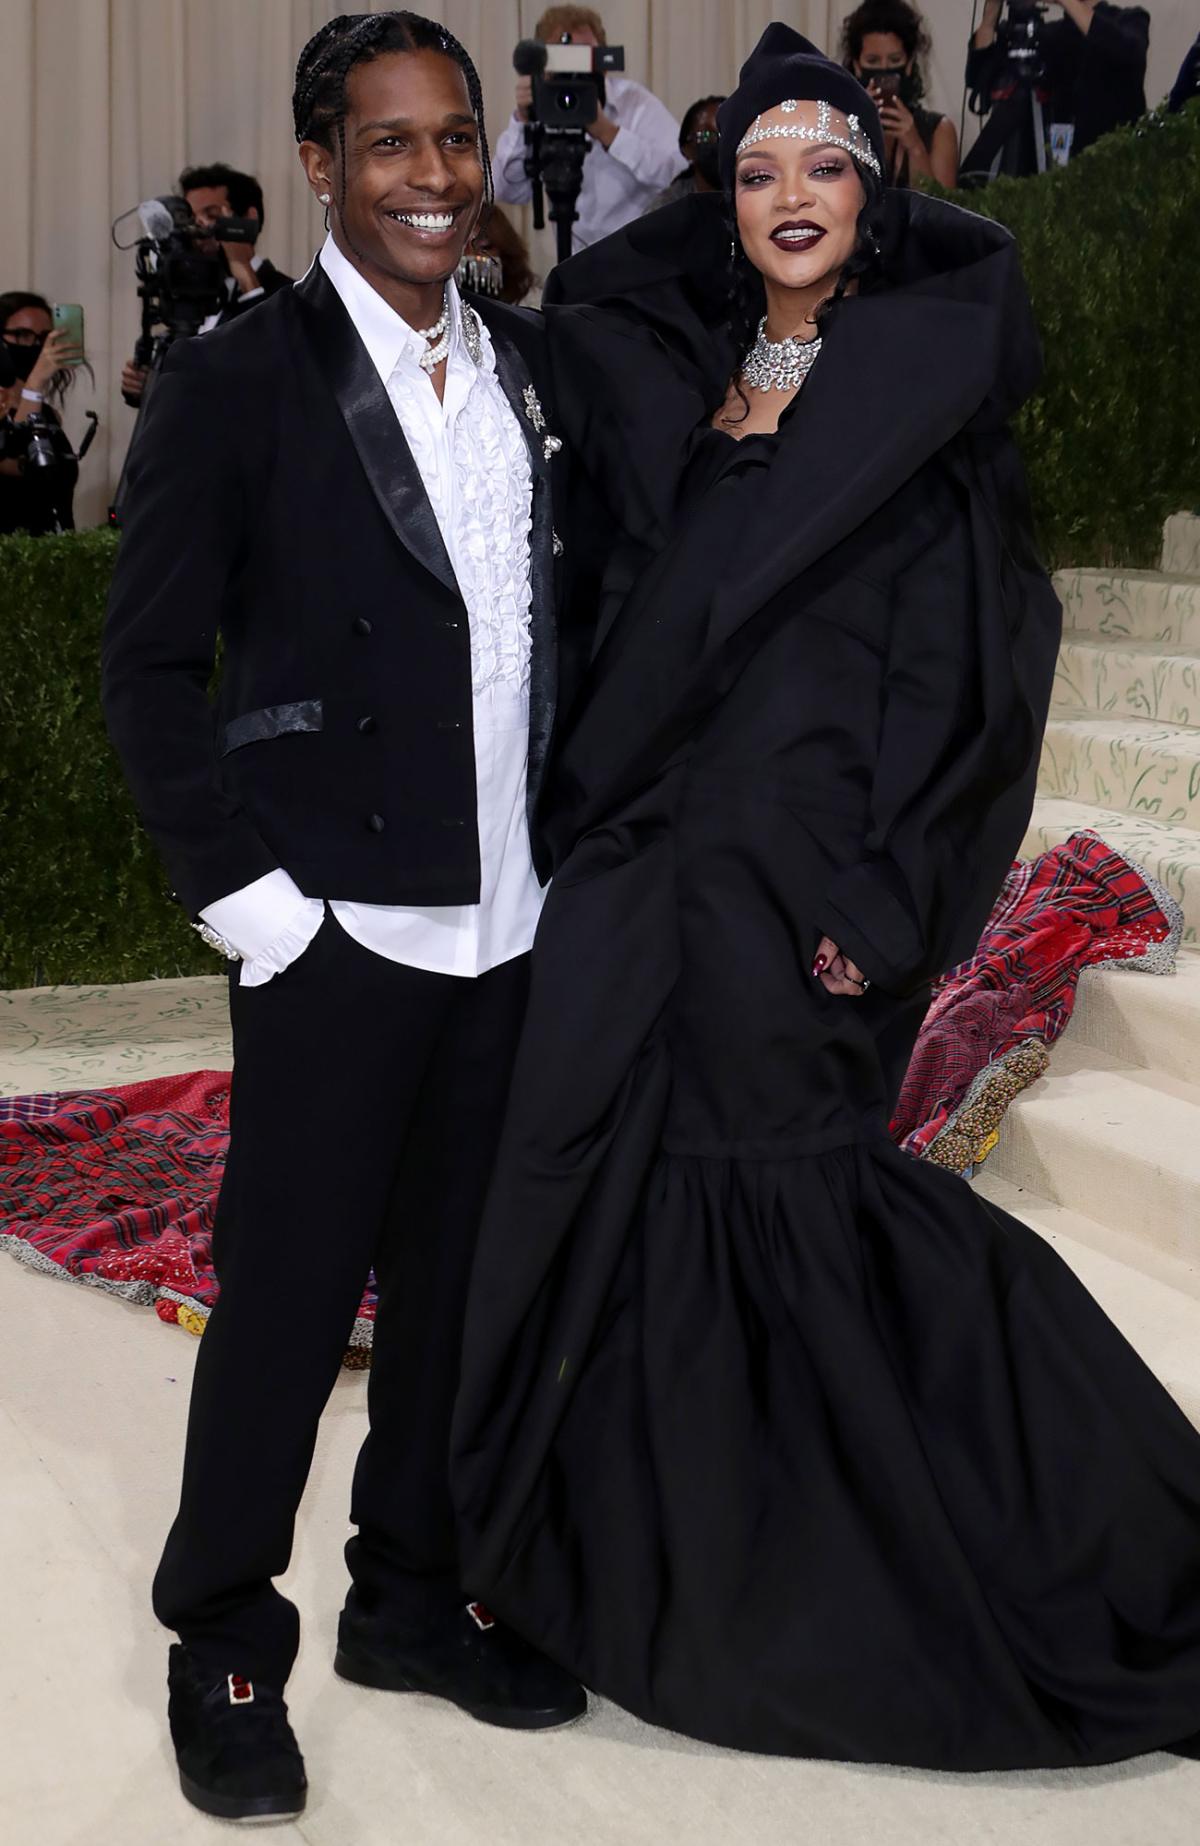 Fan recalls moment A$AP Rocky jumped over her before Met Gala: 'Sweetheart  I need to get through